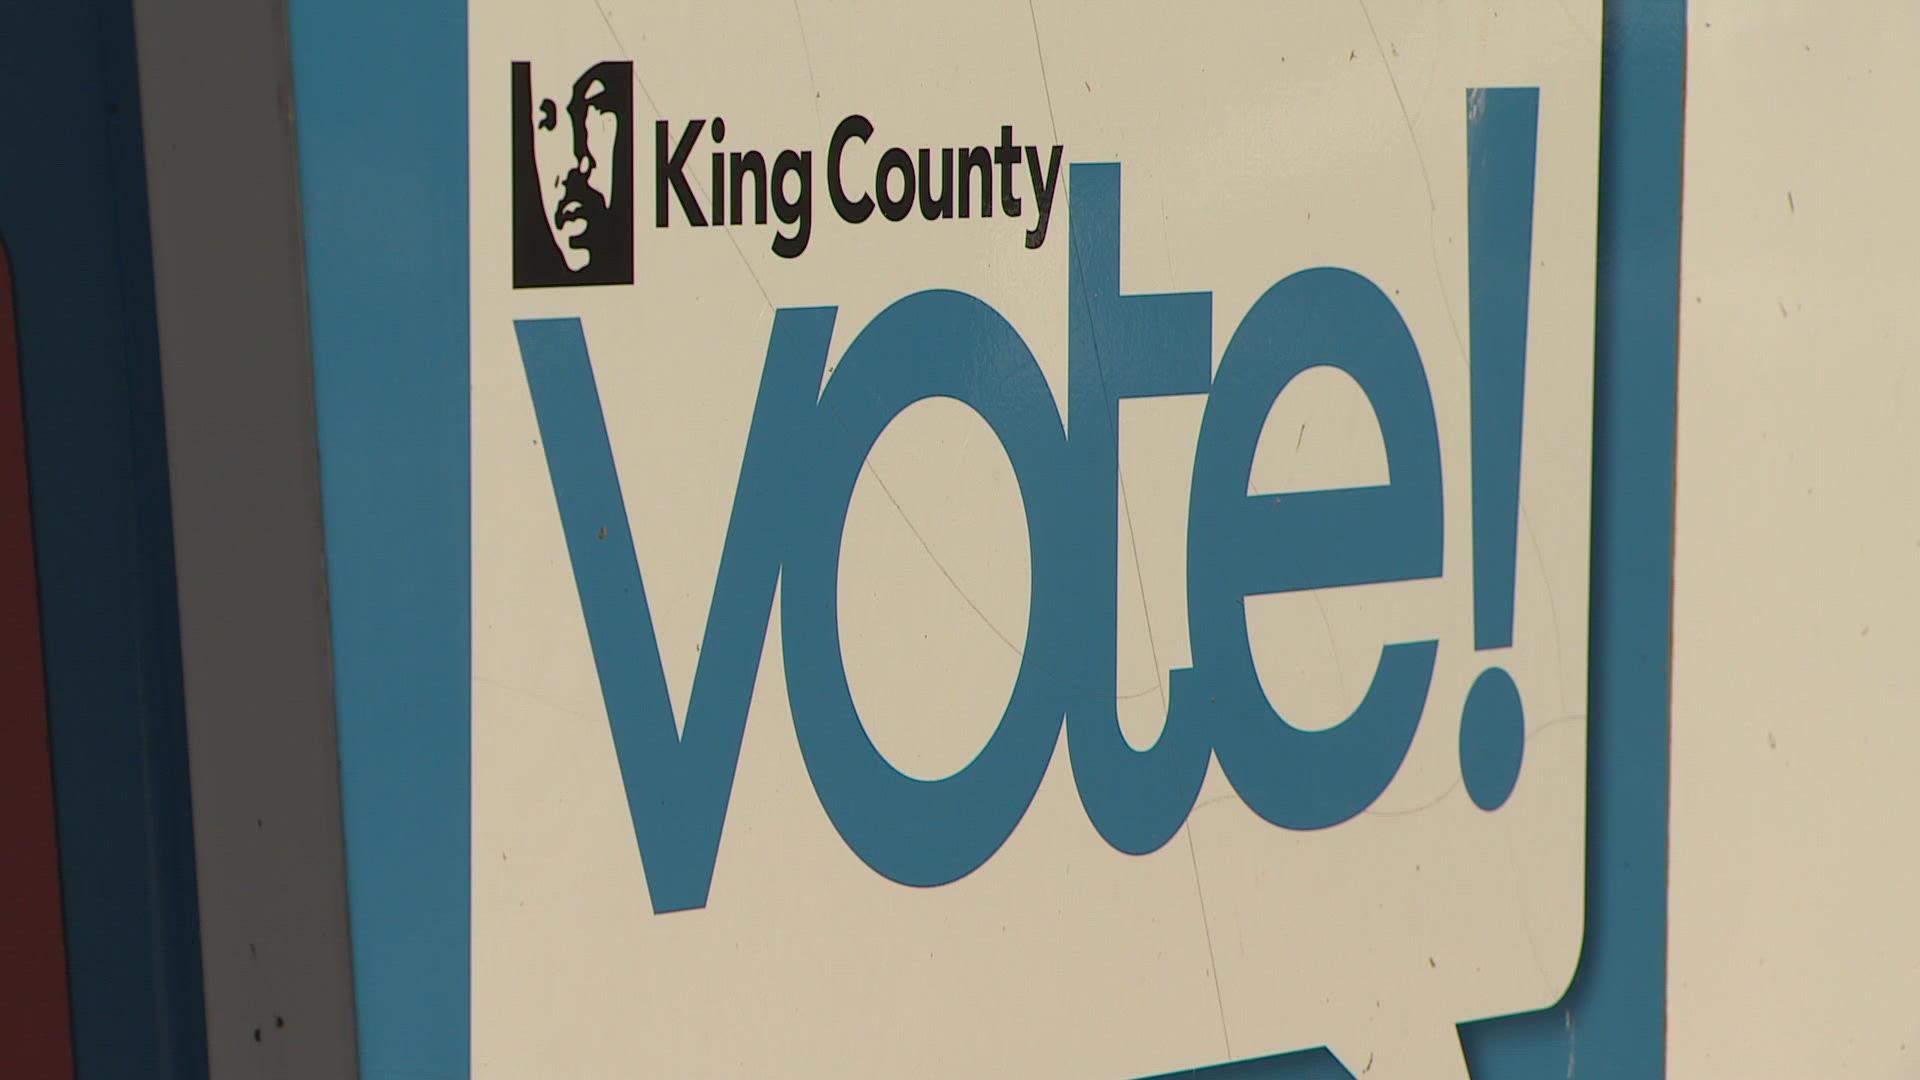 On Tuesday, the King County Elections office called for a removal of the signs, after receiving reports of "suspicious and intimidating" signs.